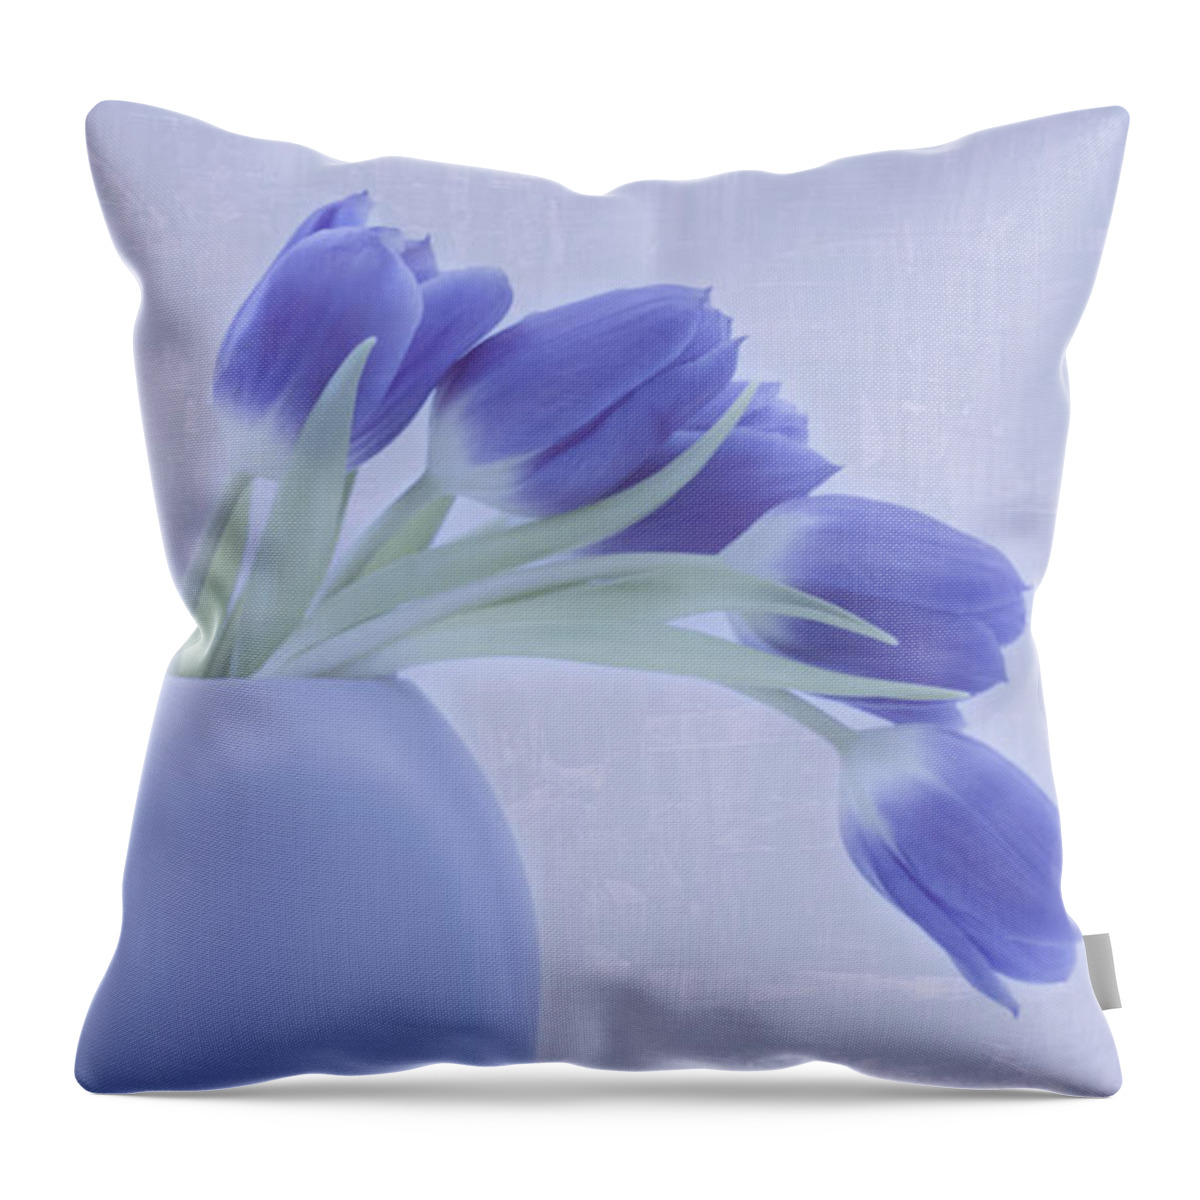 Blue Tulips Throw Pillow featuring the photograph Tulips And Birdies by Sandra Foster